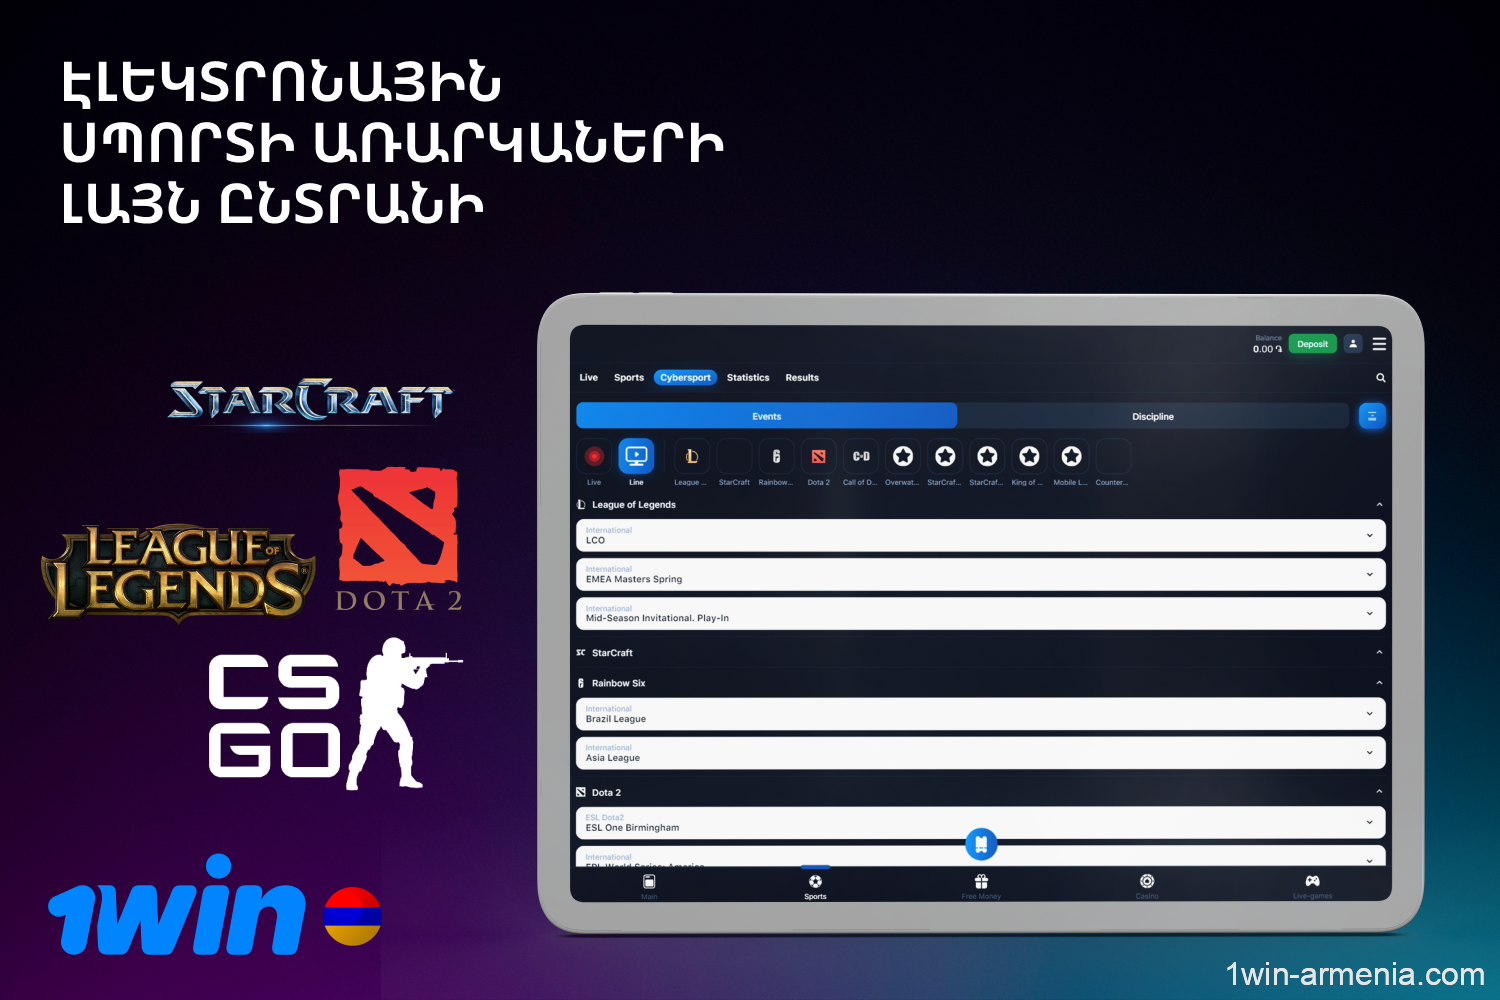 On the official website or 1win app, Armenian players will discover a wide selection of online games and matches, covering both major and lesser-known official tournaments